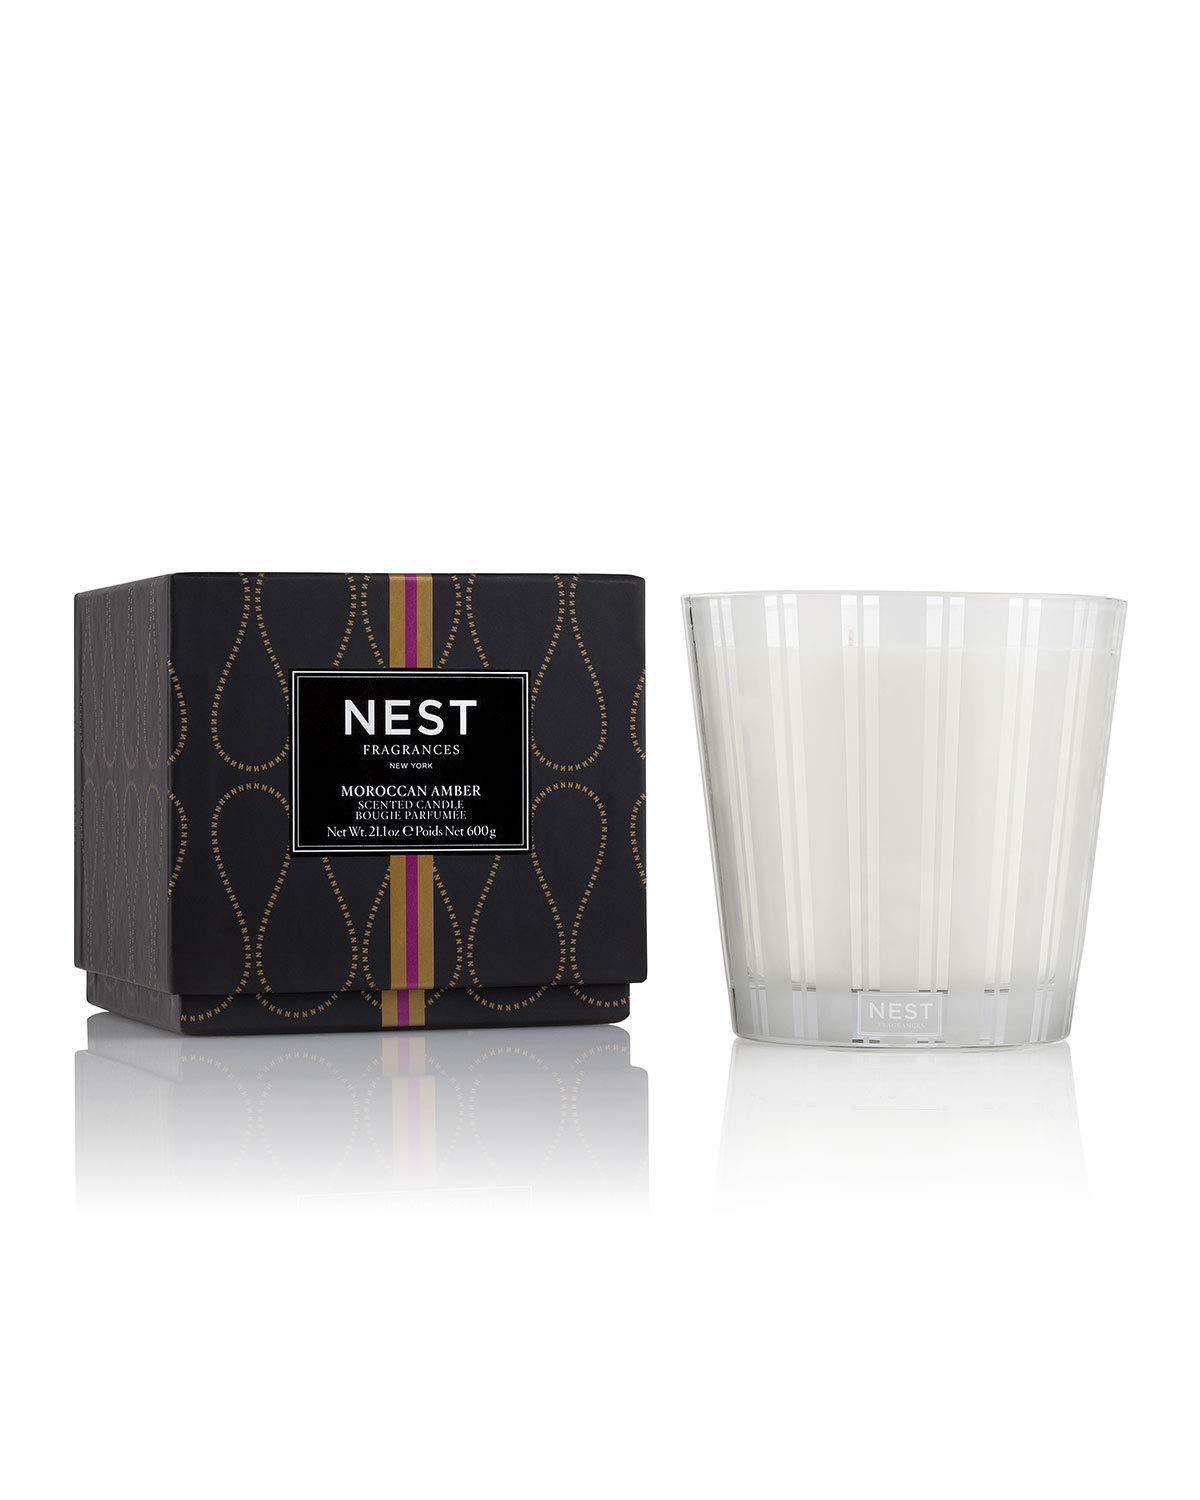 Nest Fragrances Moroccan Amber Candle - ScentGiant